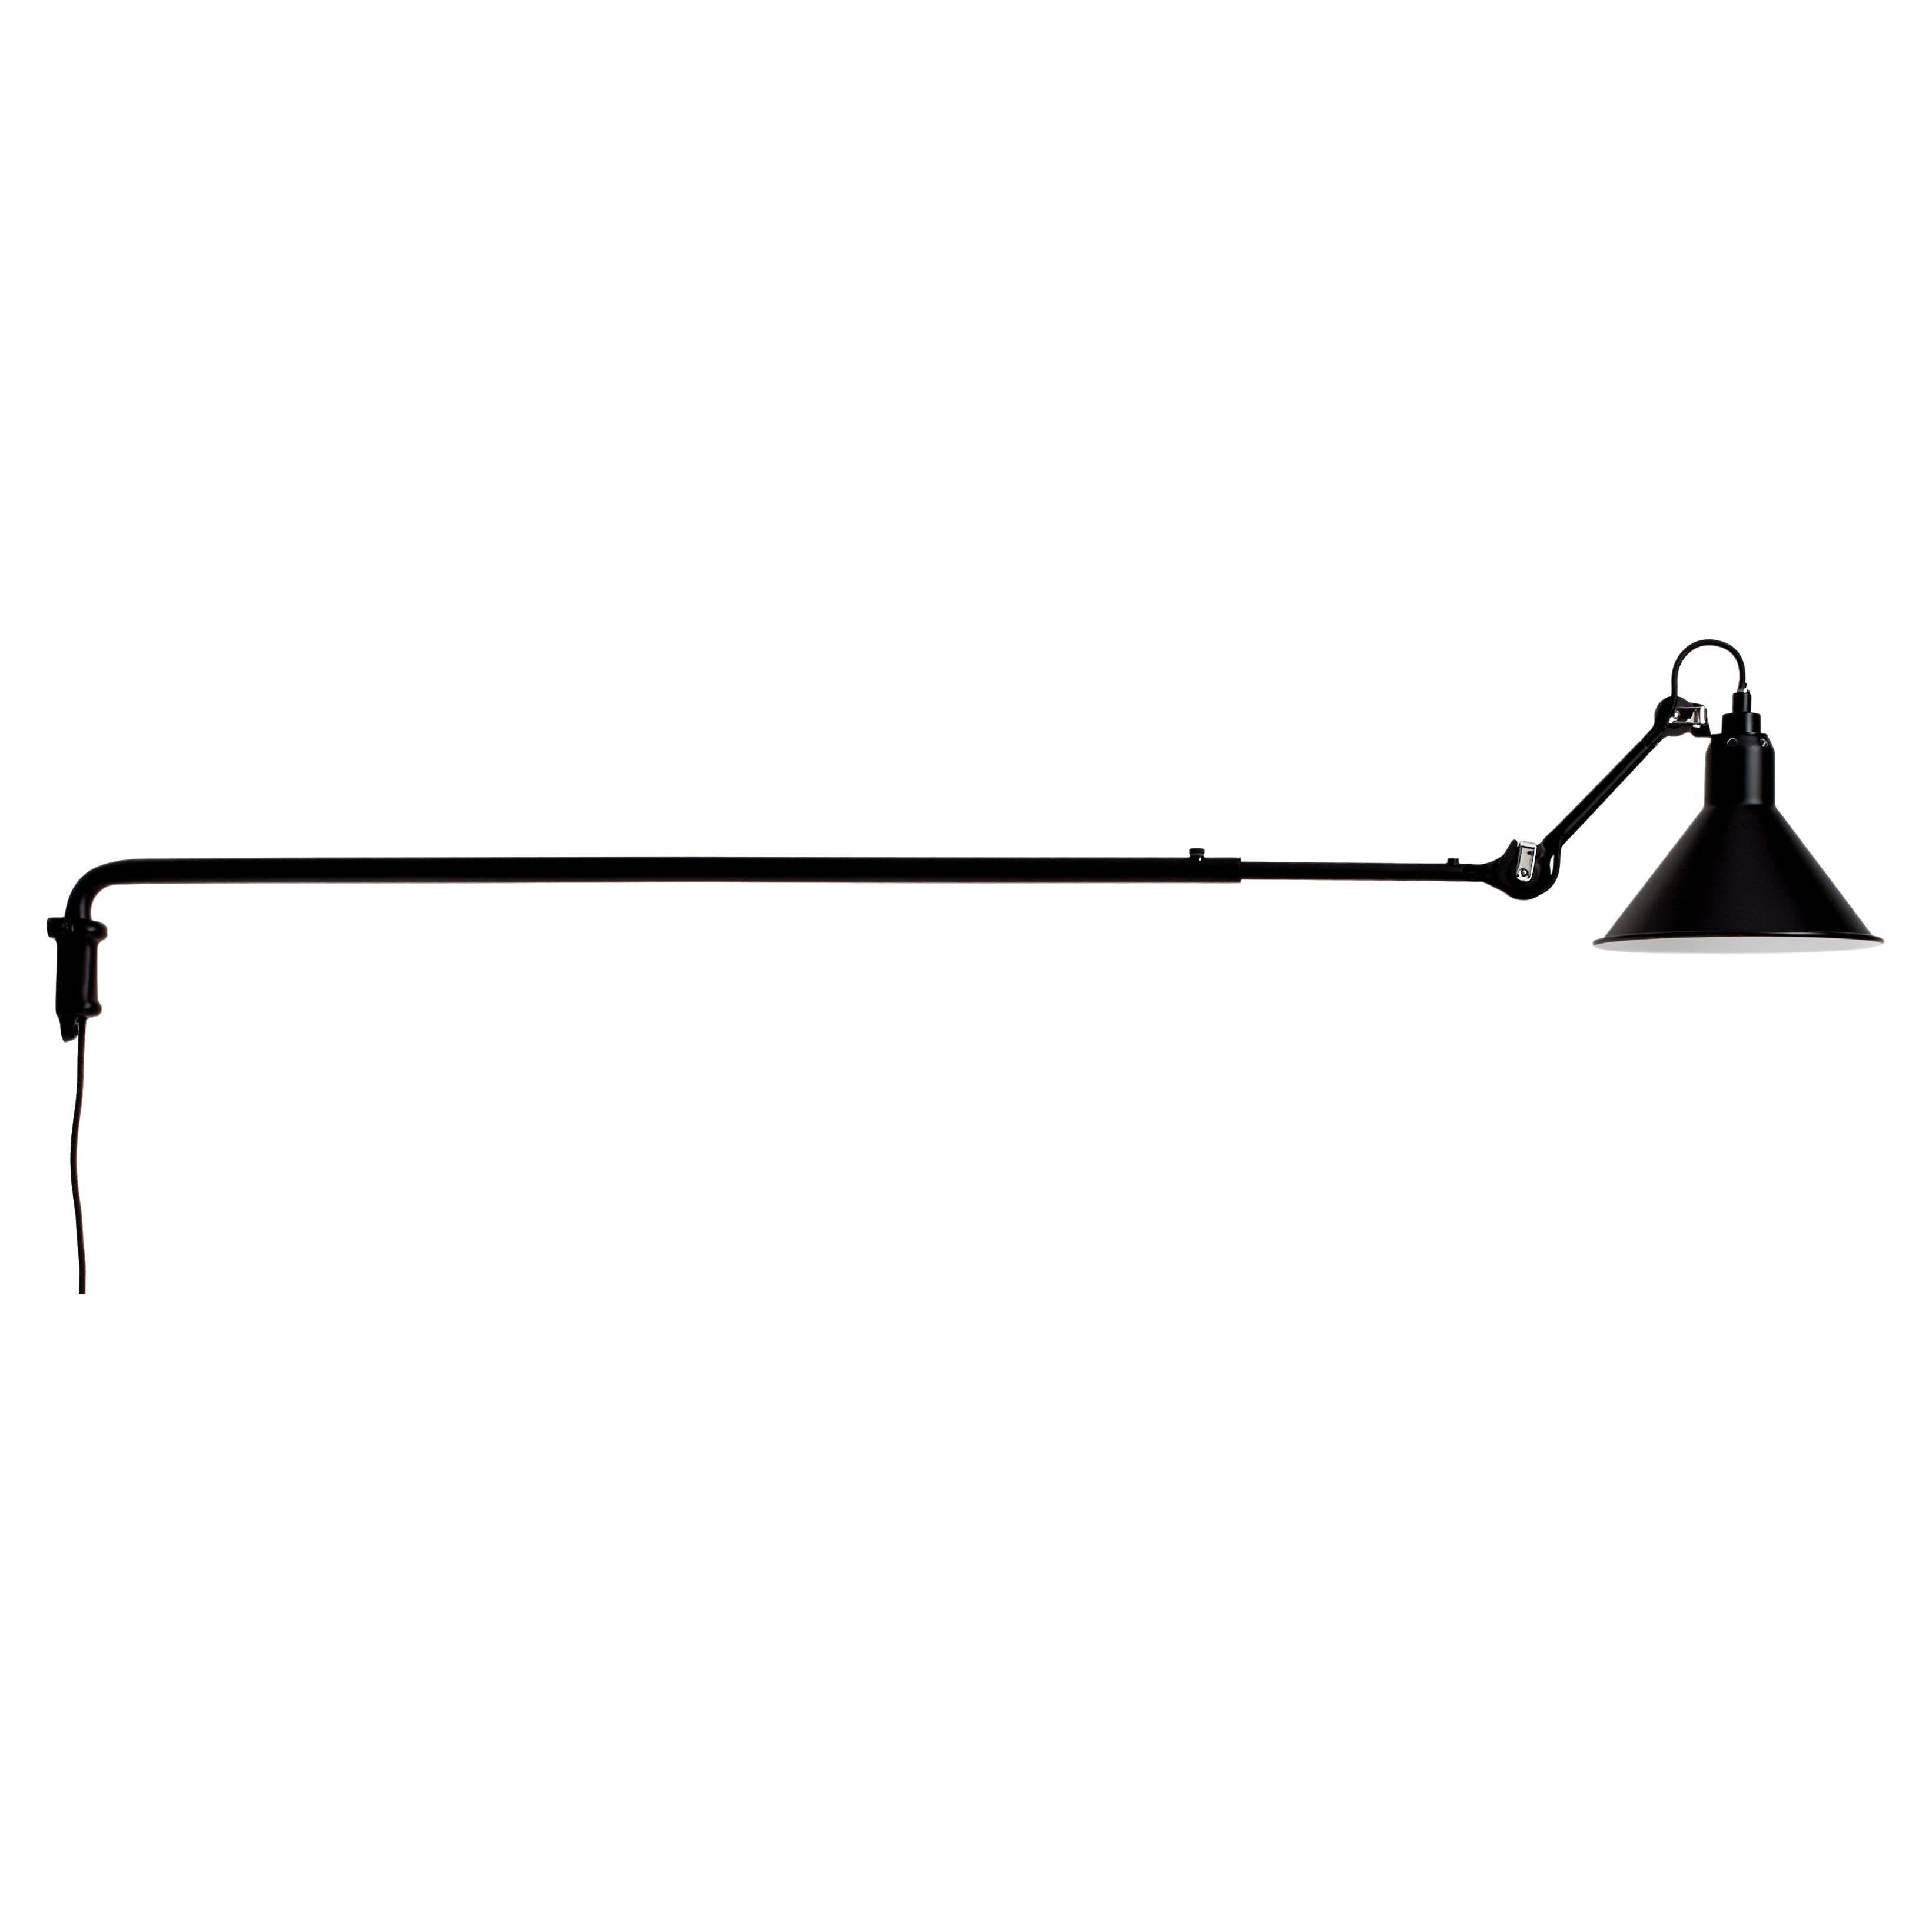 DCW Editions La Lampe Gras N°213 Wall Lamp in Black Arm and Black Shade For Sale